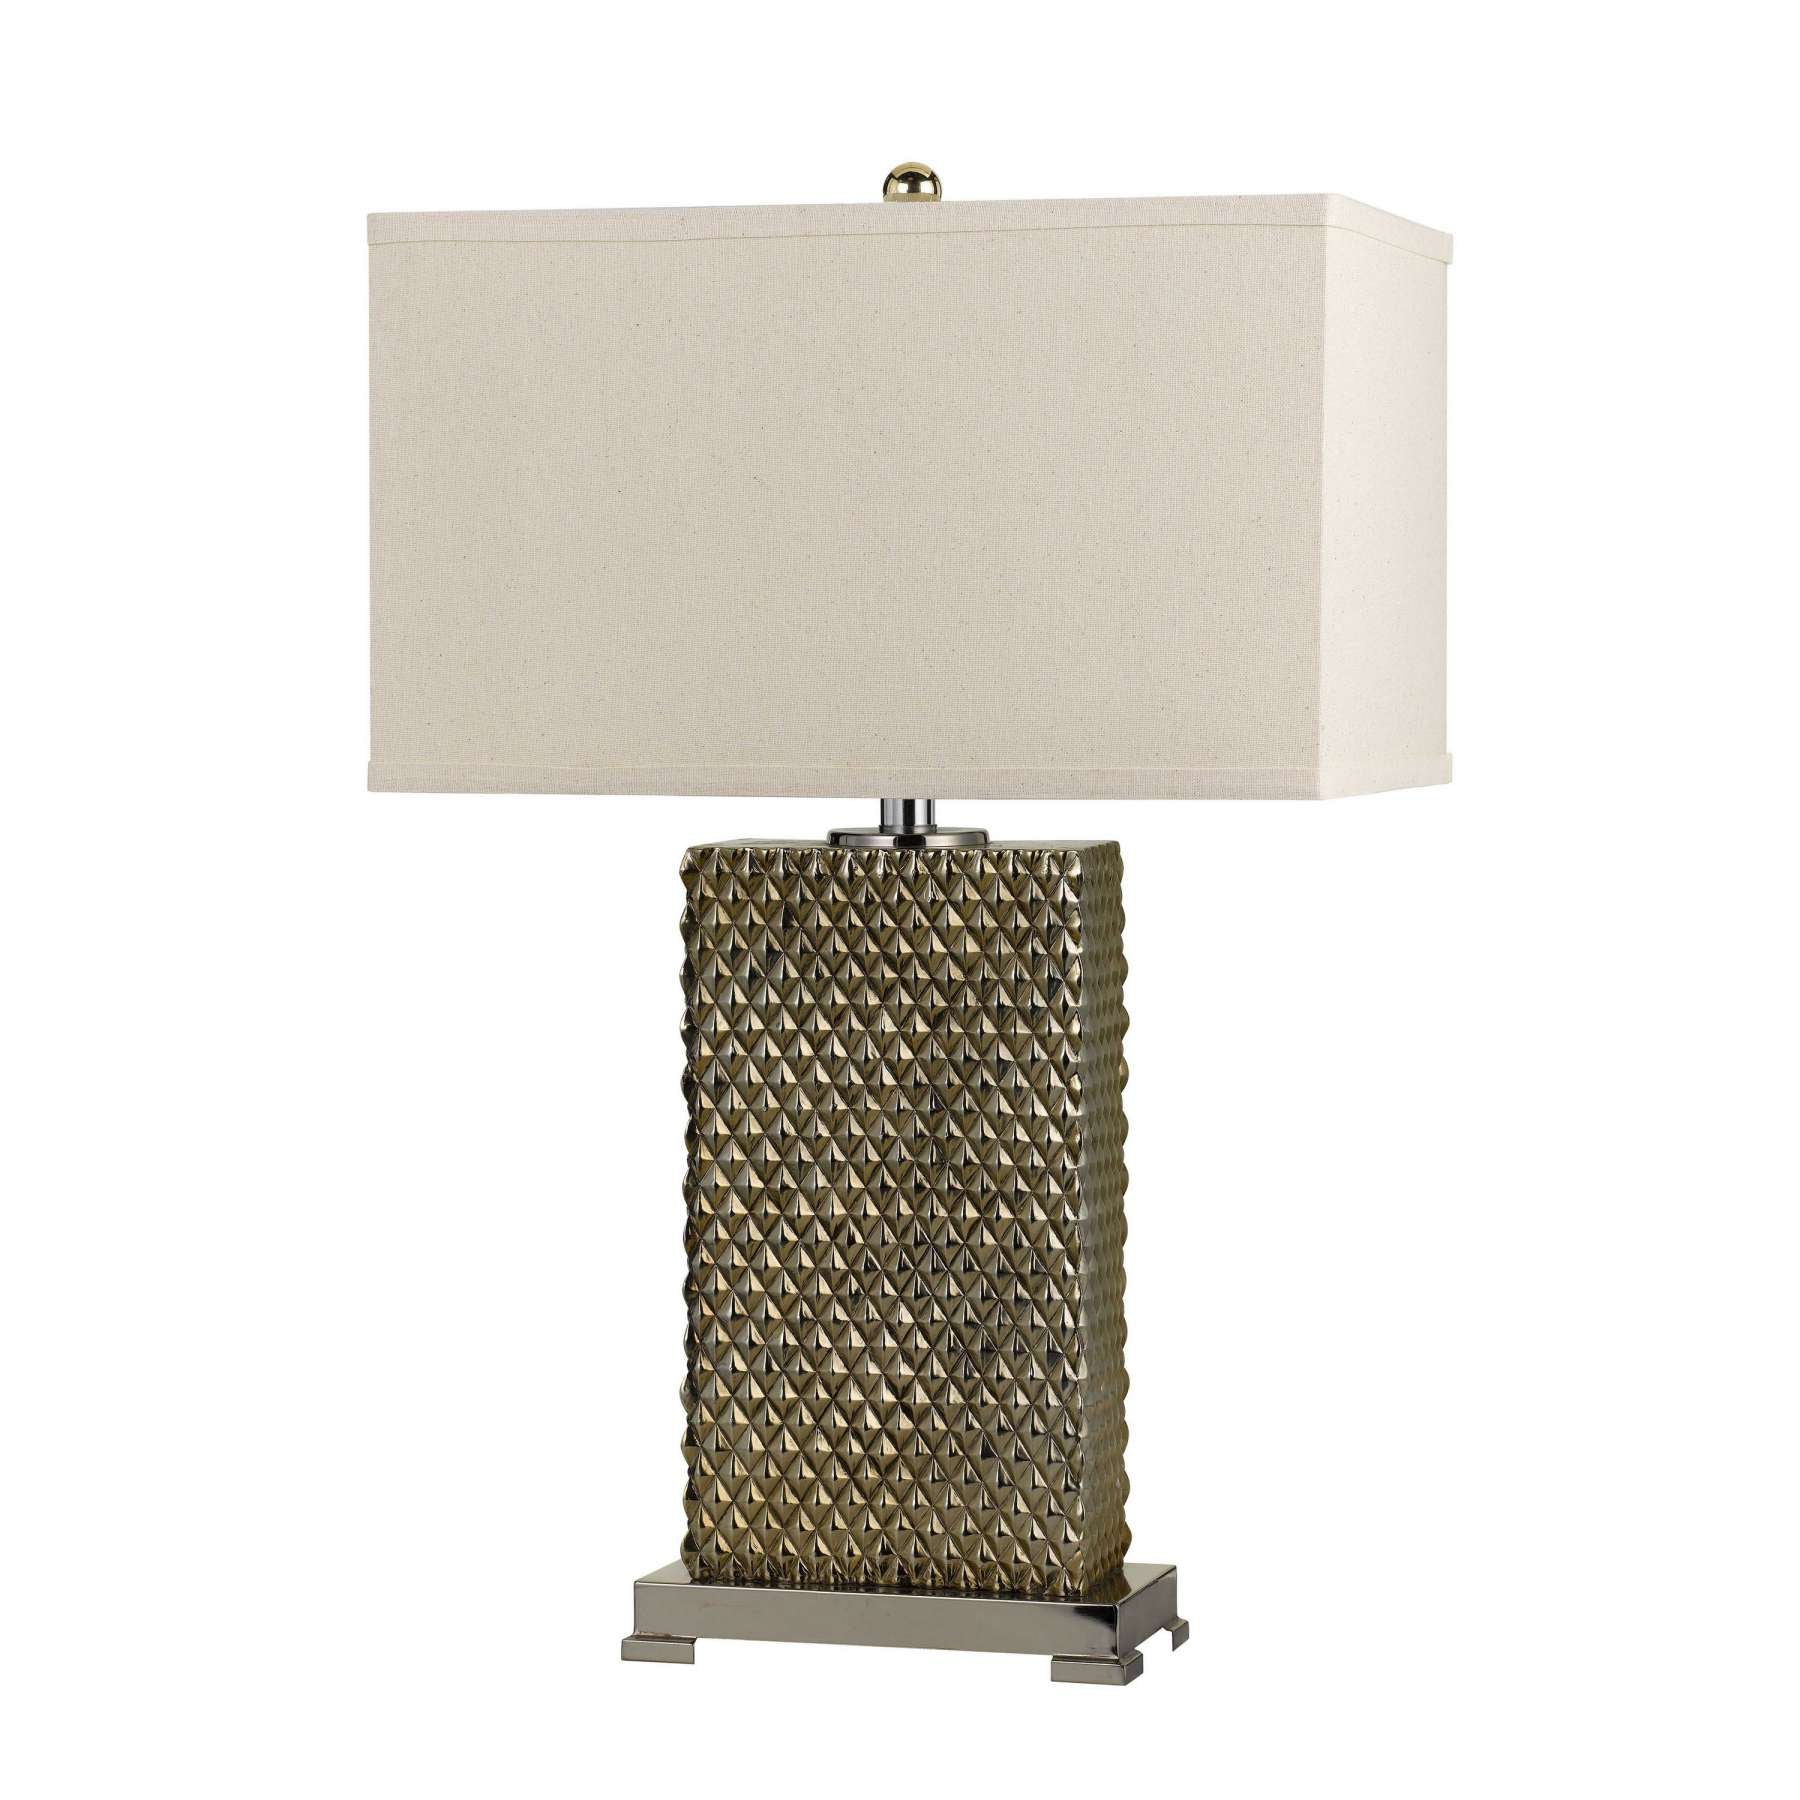 3 Way Table Lamp With Studded Diamond Pattern Ceramic Base, Cream And Gold By Benzara